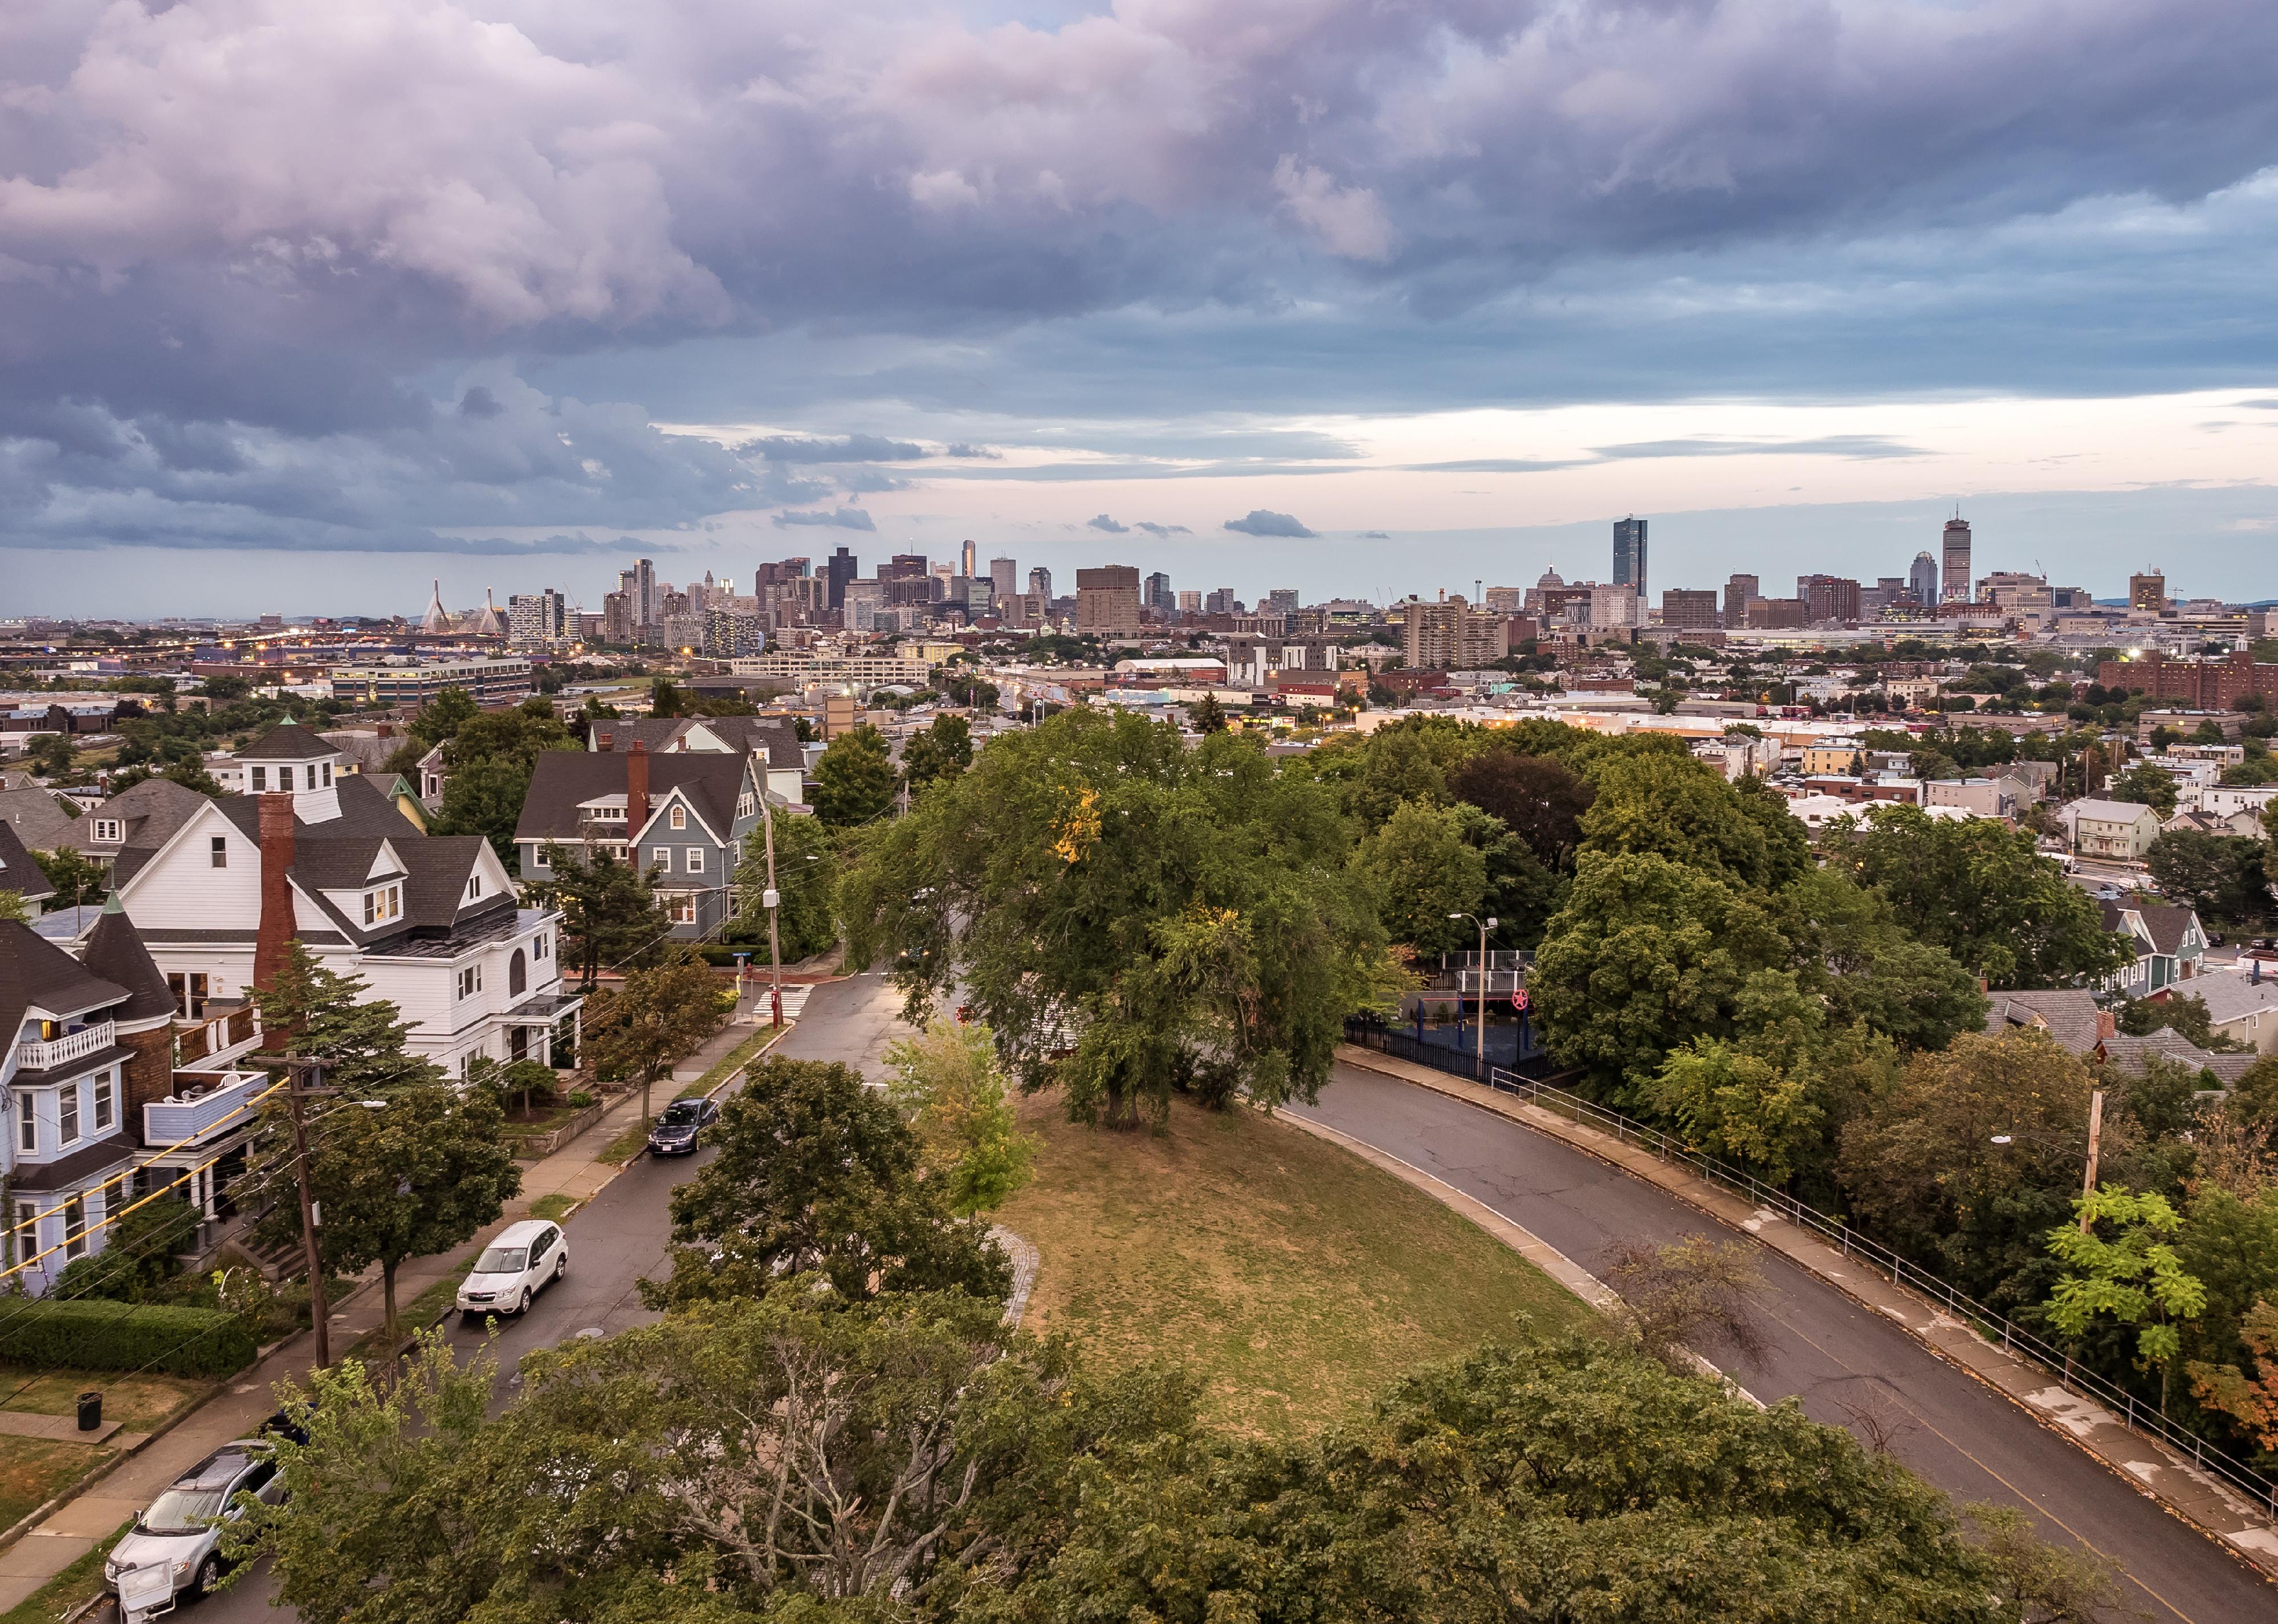 The skyline of downtown Boston as seen from the Prospect Hill Tower in Somerville.